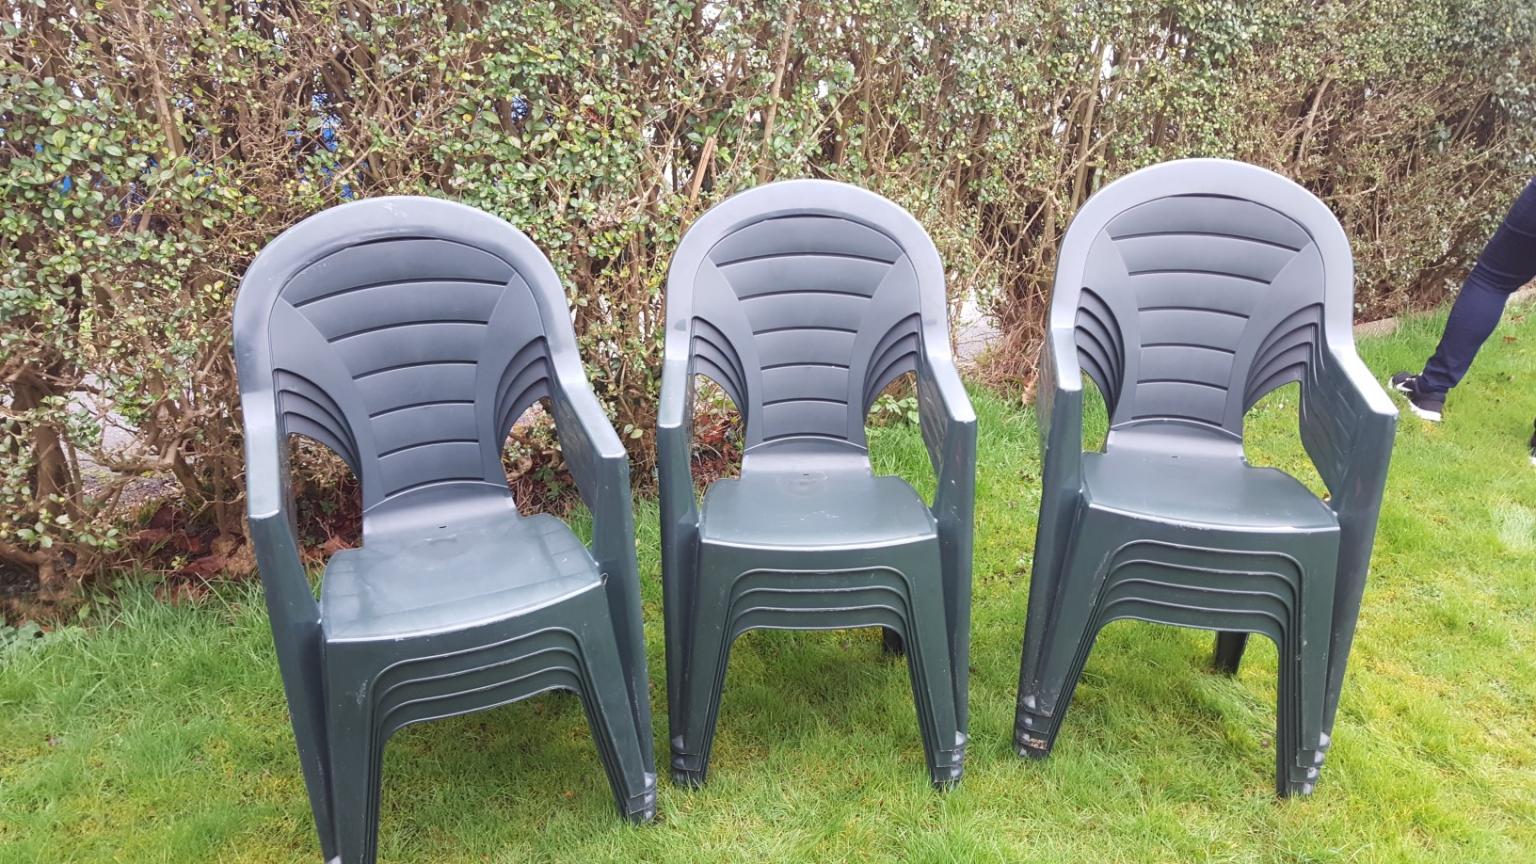 Green plastic garden chairs in KT6 London for £3.00 for